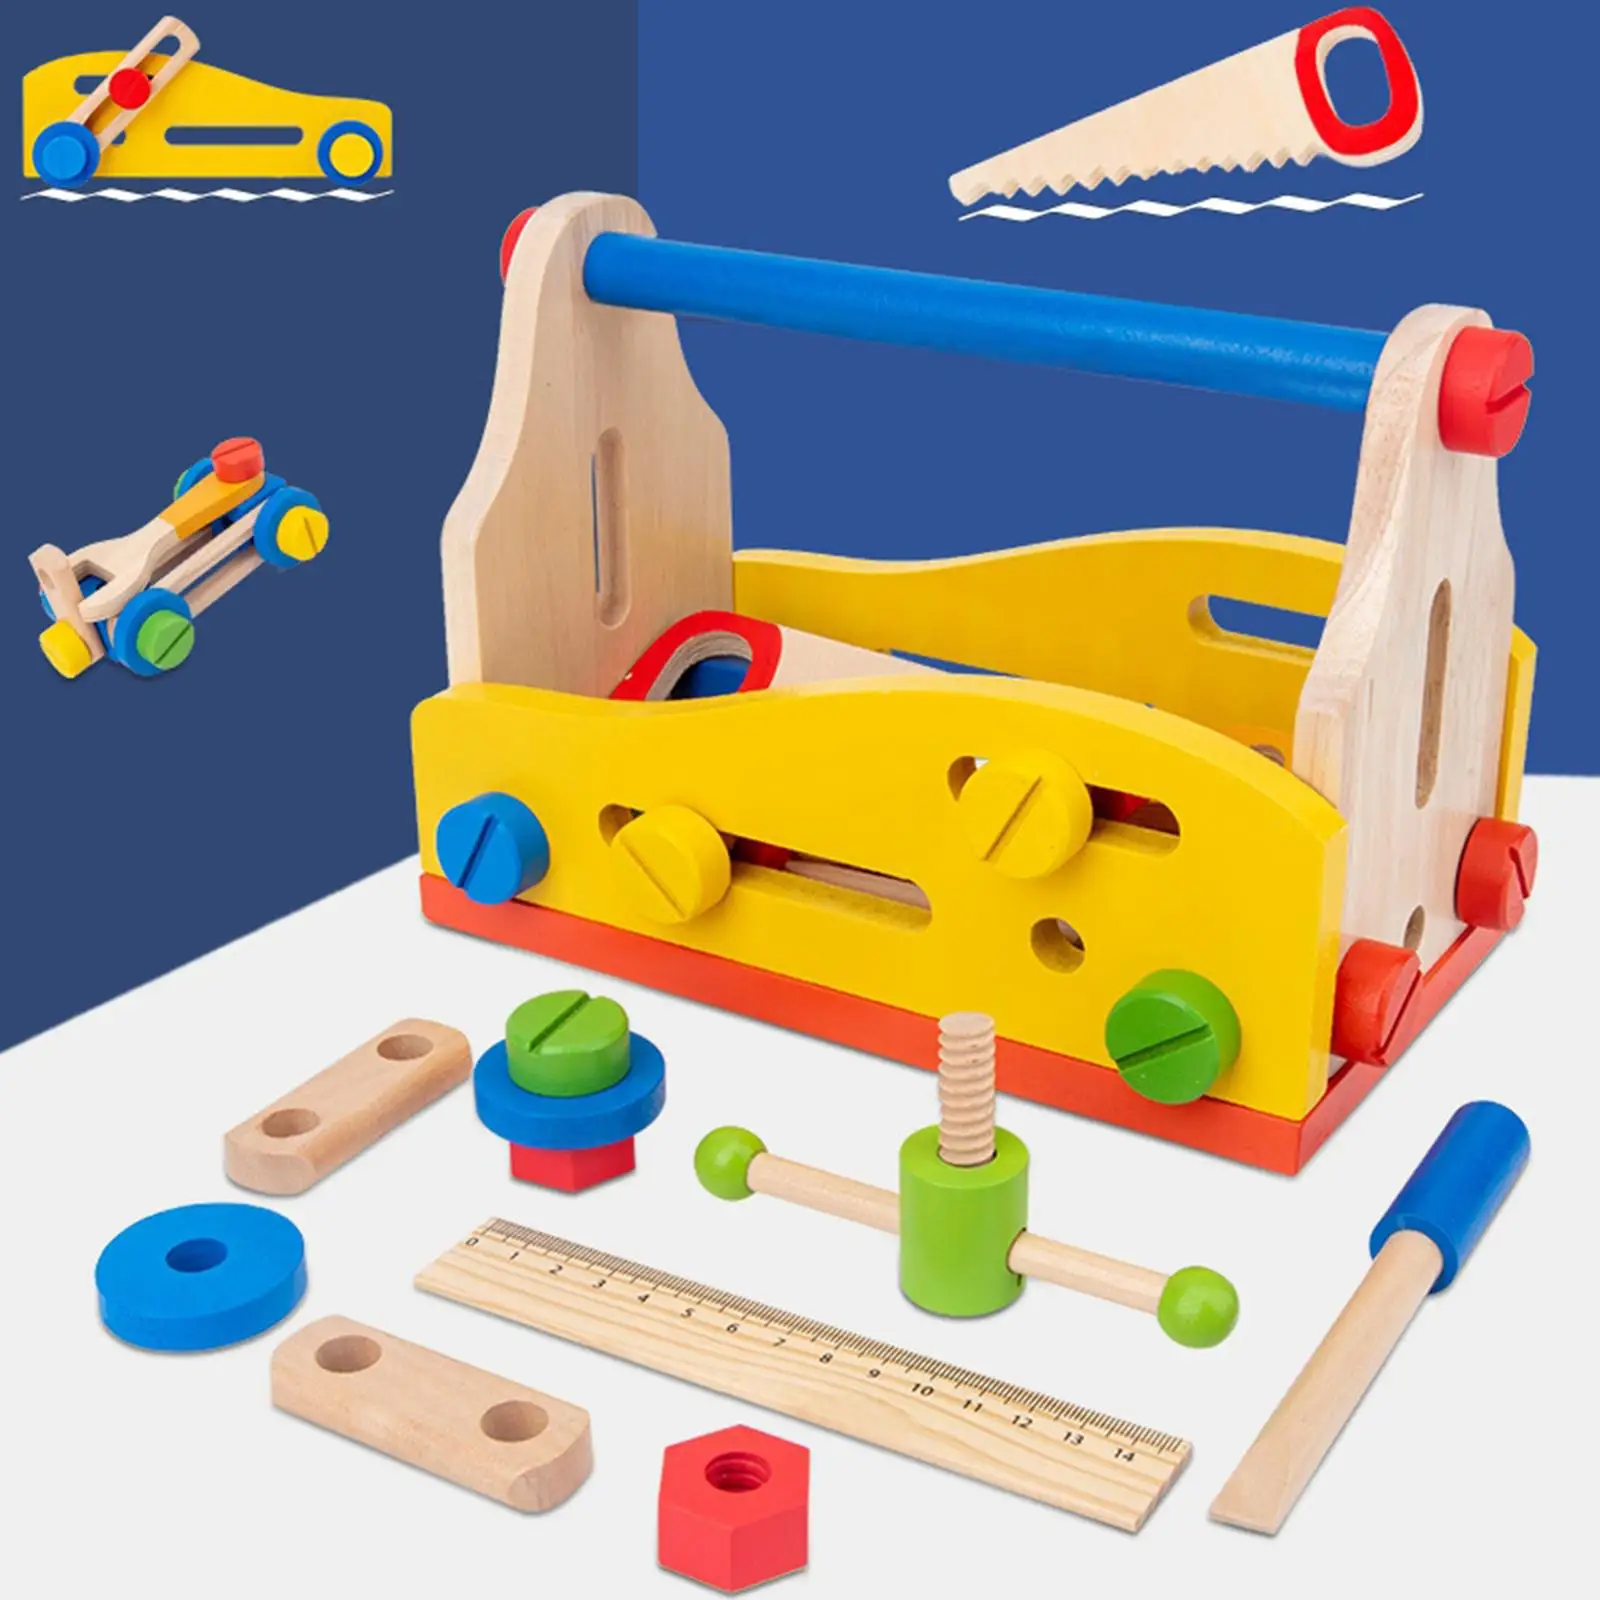 Montessori Wooden Tool Toy Preschool Learning Activities Play Tool Construction Toy for Kids Toddler Preschool